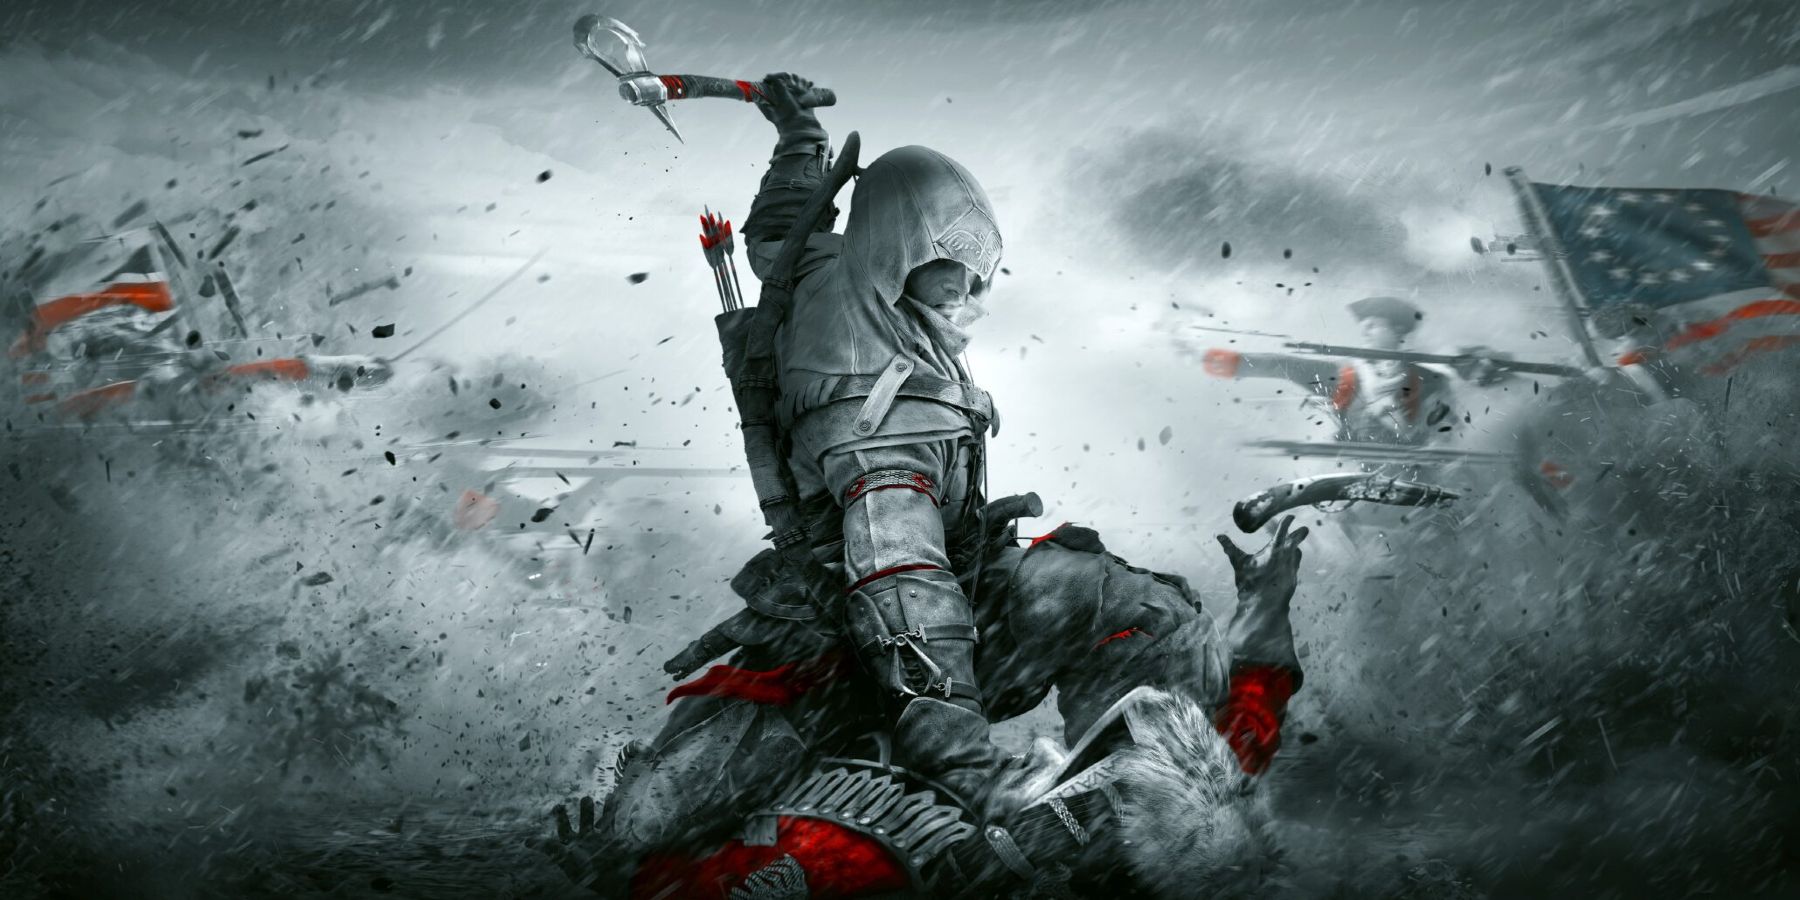 A promotional image for Ubisoft's Assassin's Creed 3.